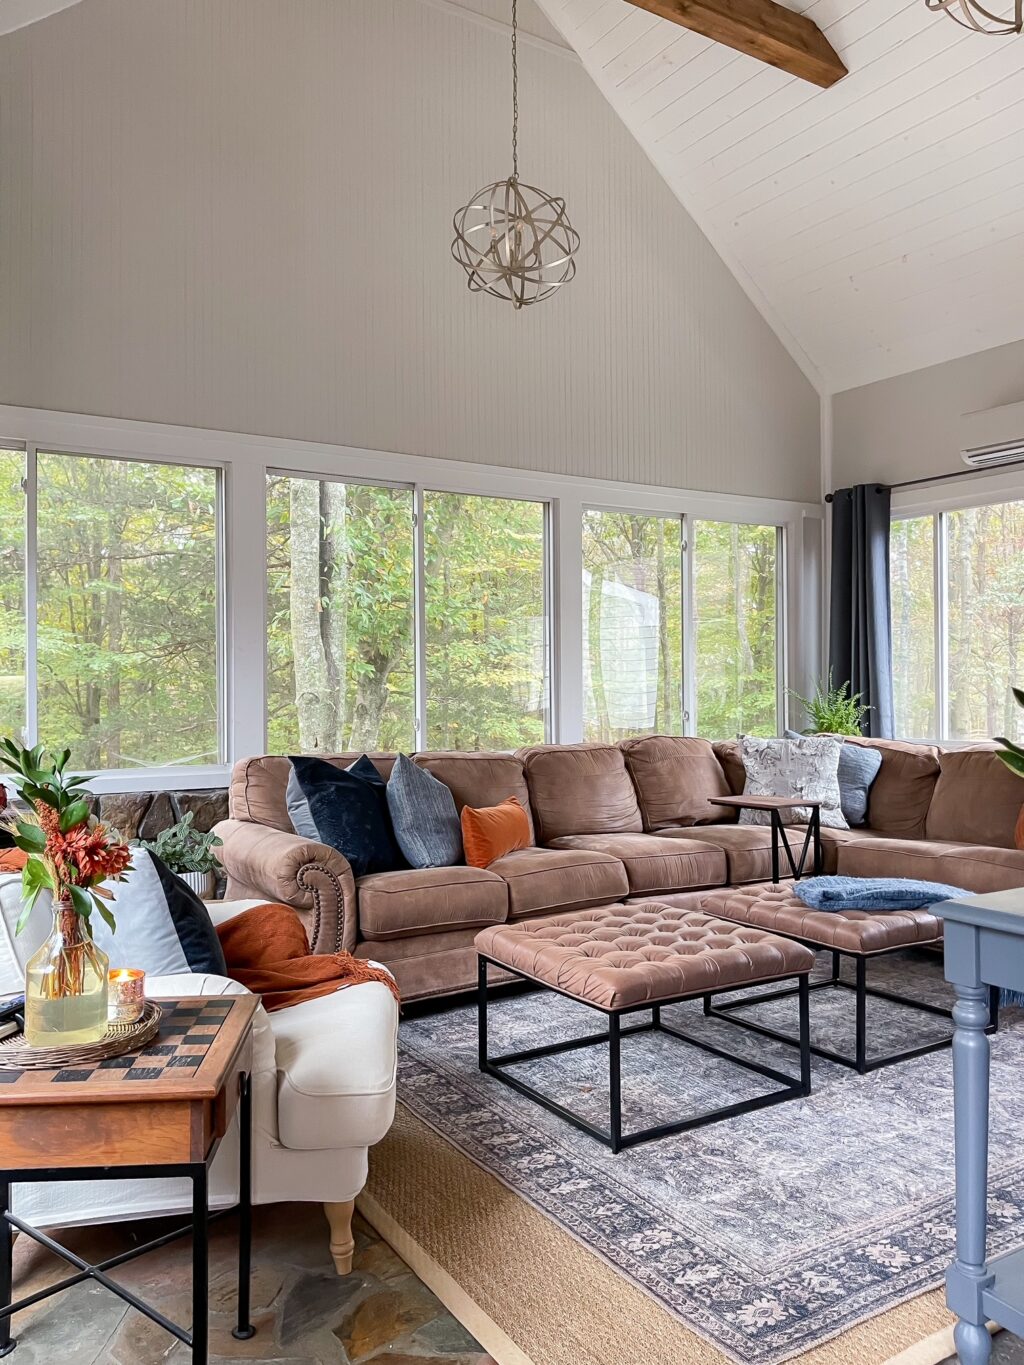 Family room with brown sectional and white accent chair with blue and rust colors.